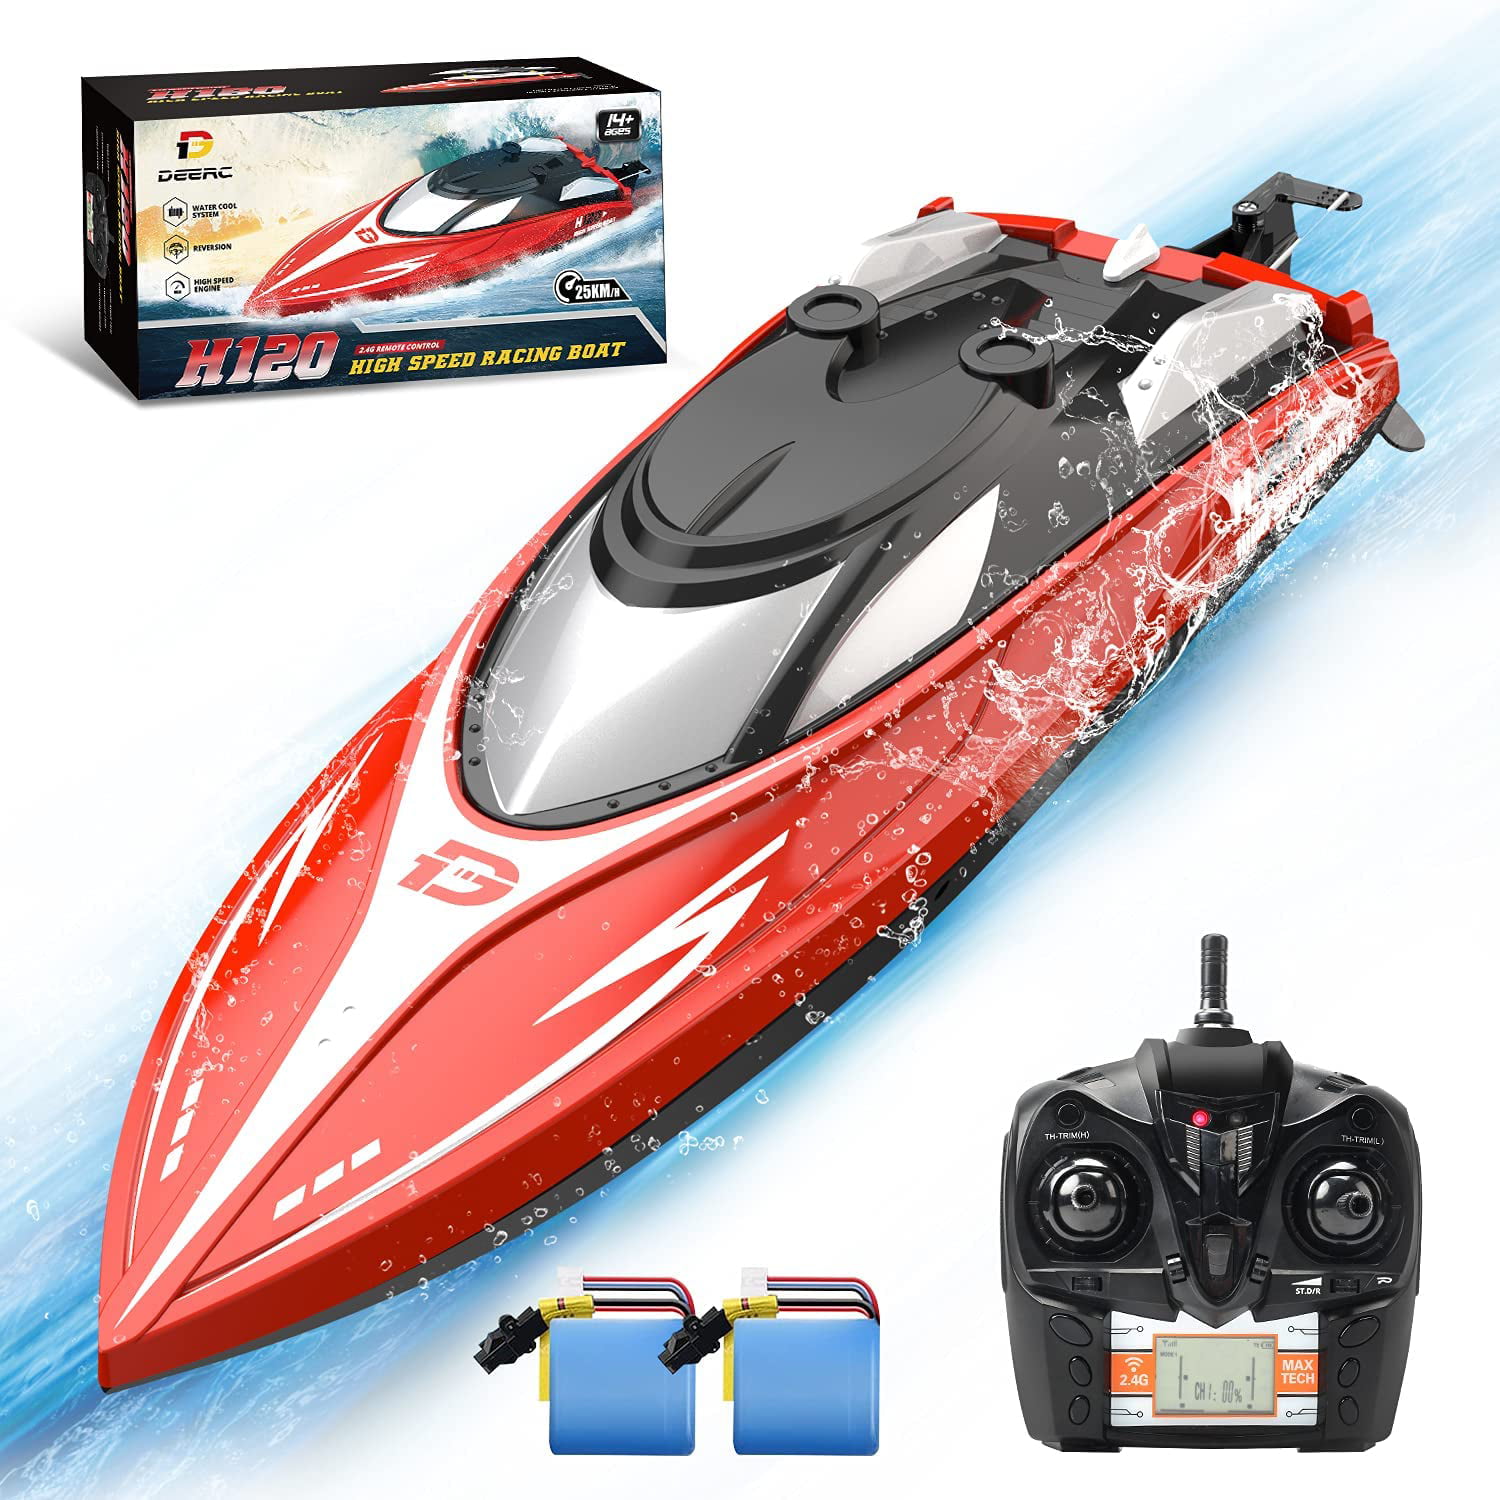 Lakes Lelestar Mini RC Boat RC Submarine Toy Underwater Submarine Bath Toy Remote Control Boat In Bathtub Pools Blue Fast RC Race Boat High Speed Toy Boat Gifts For Kids